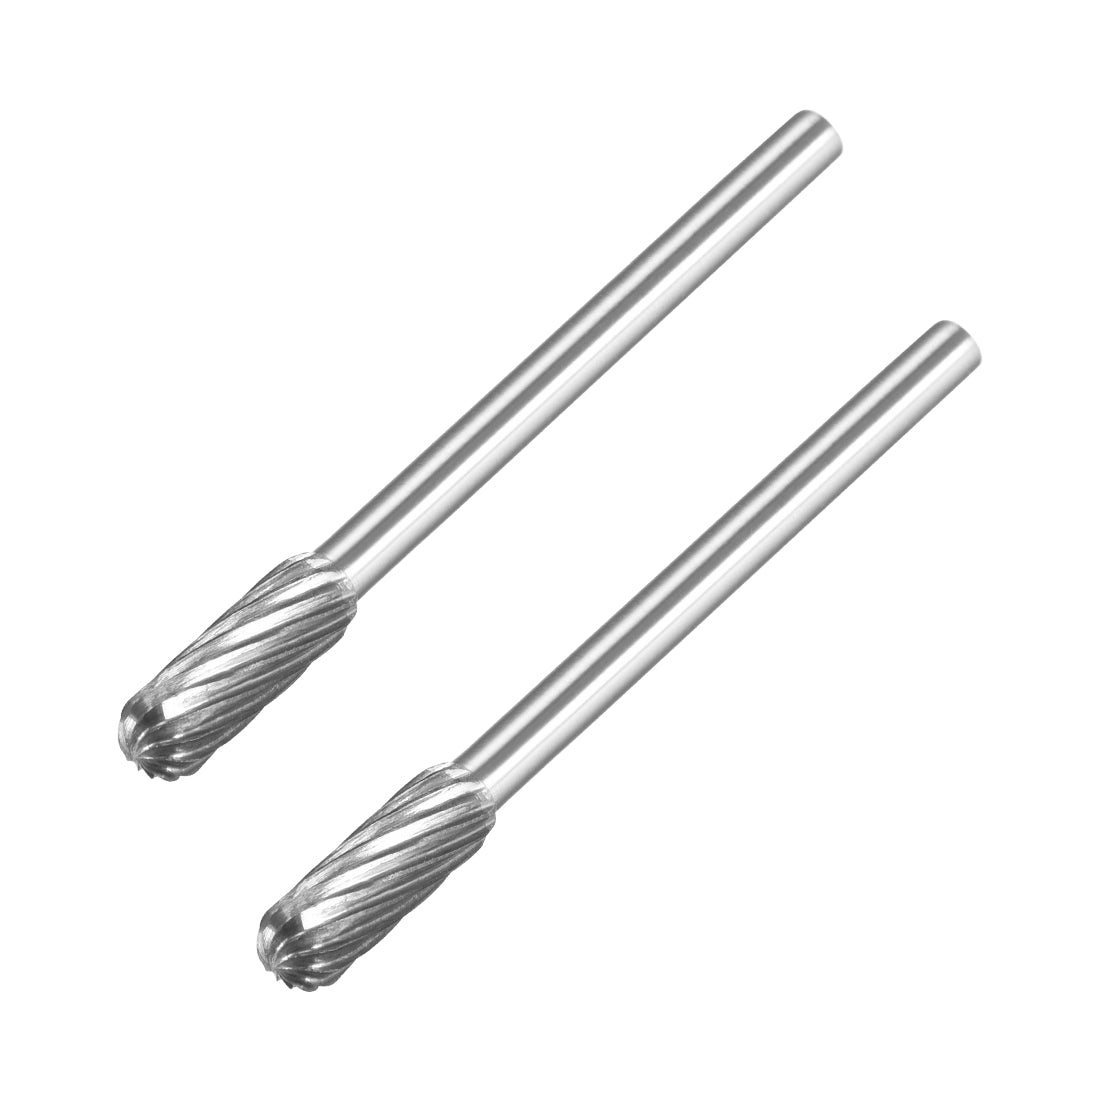 uxcell Uxcell Single Cut Rotary Burrs File Radius Cylinder Shape 1/8" Shank and 4 mm Head 2pcs